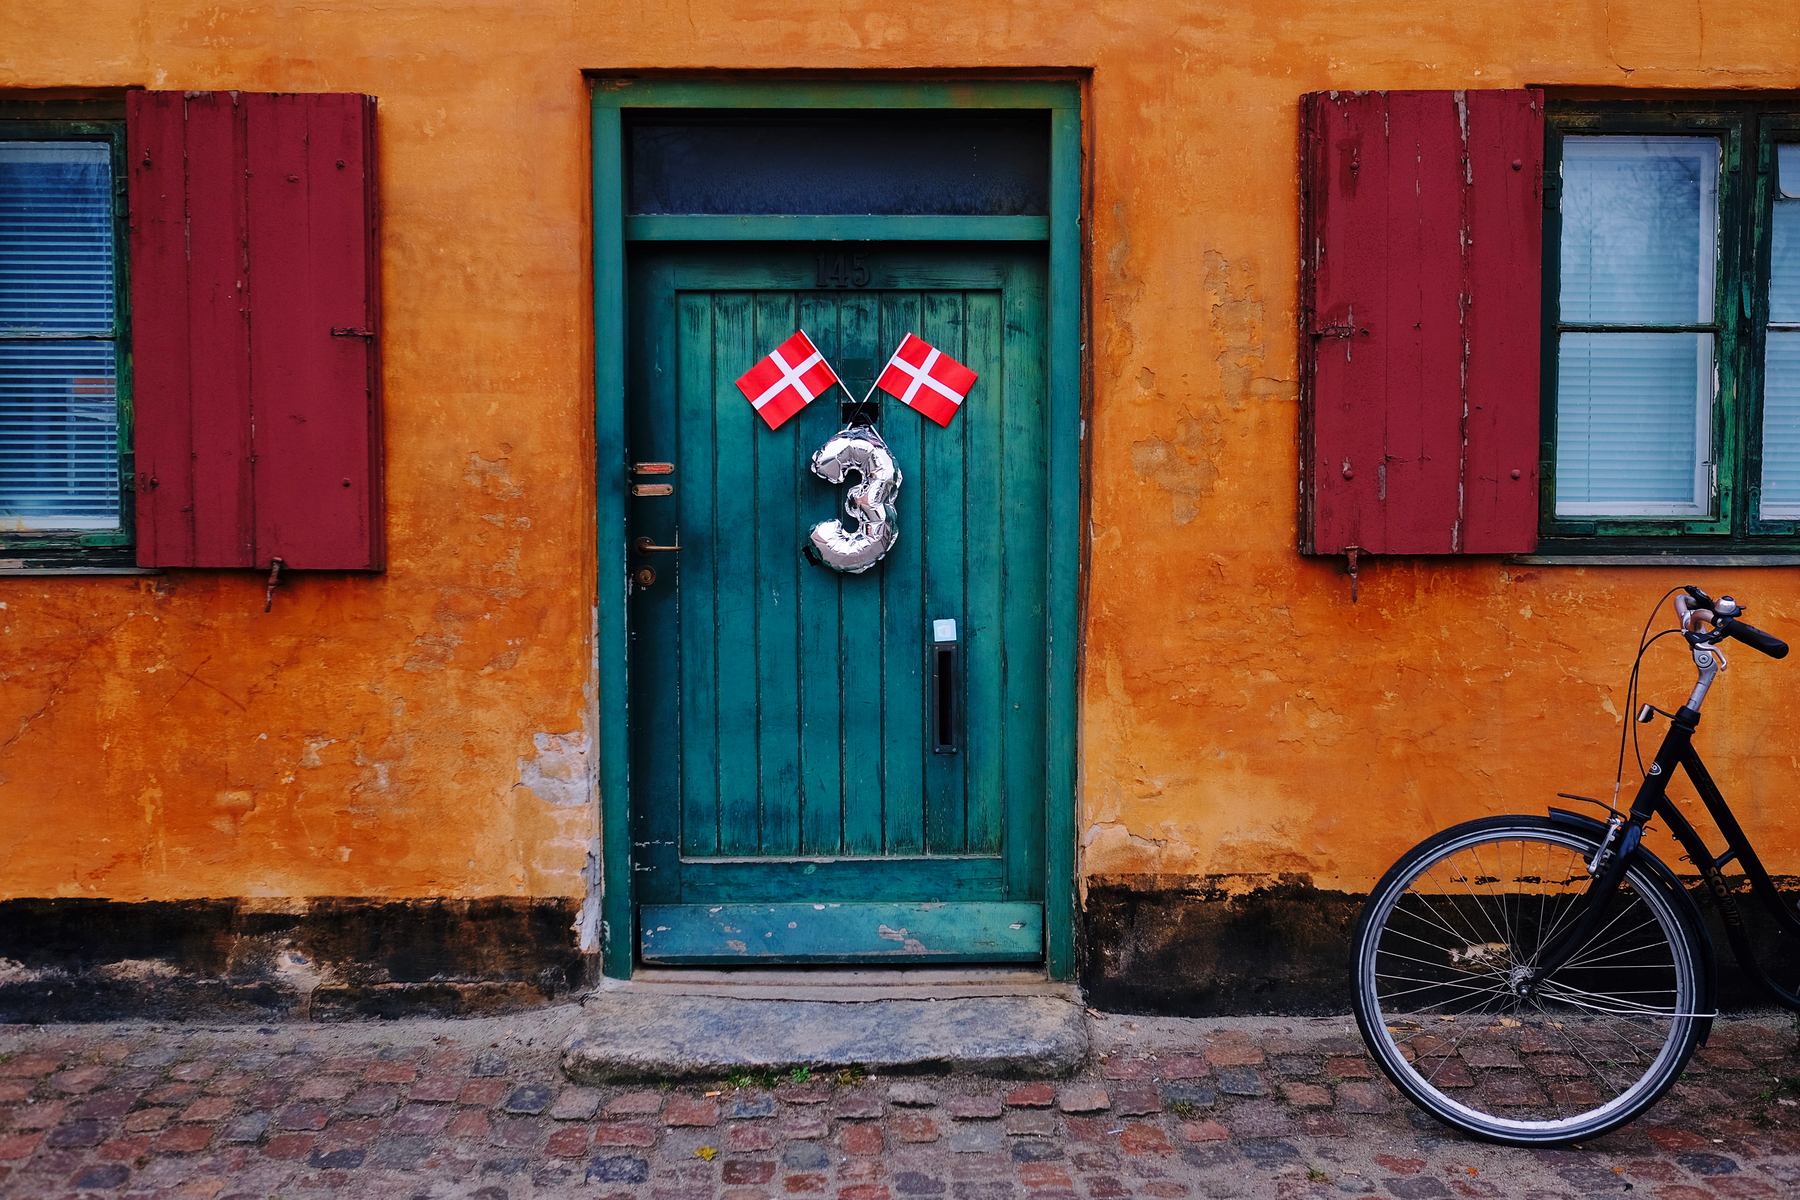 A colorful scene with an orange wall, a teal wooden door flanked by red shutters, Danish flags, a silver balloon shaped like the number &ldquo;3&rdquo;, and a parked bicycle to the right.